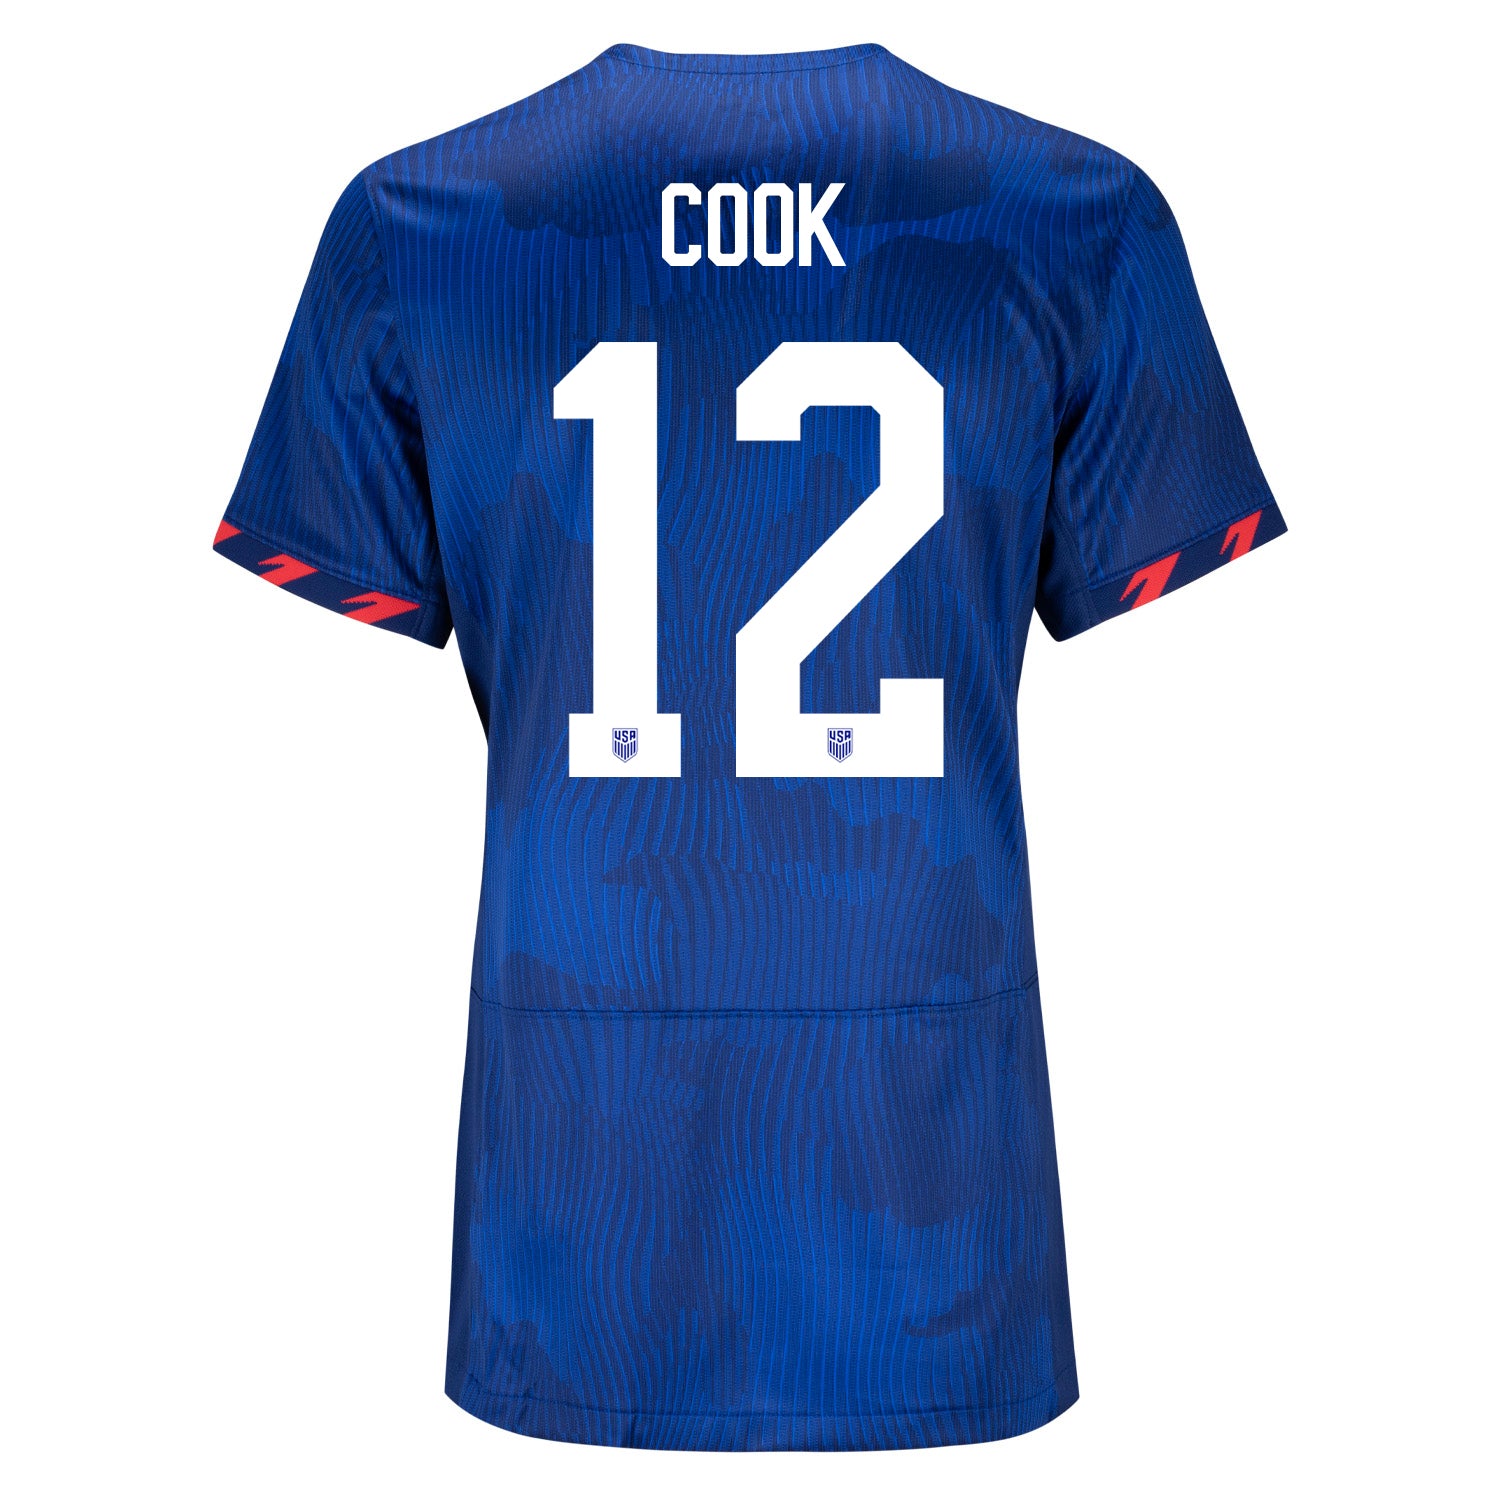 Women's Personalized Nike USWNT Away Stadium Jersey in Blue - Back View